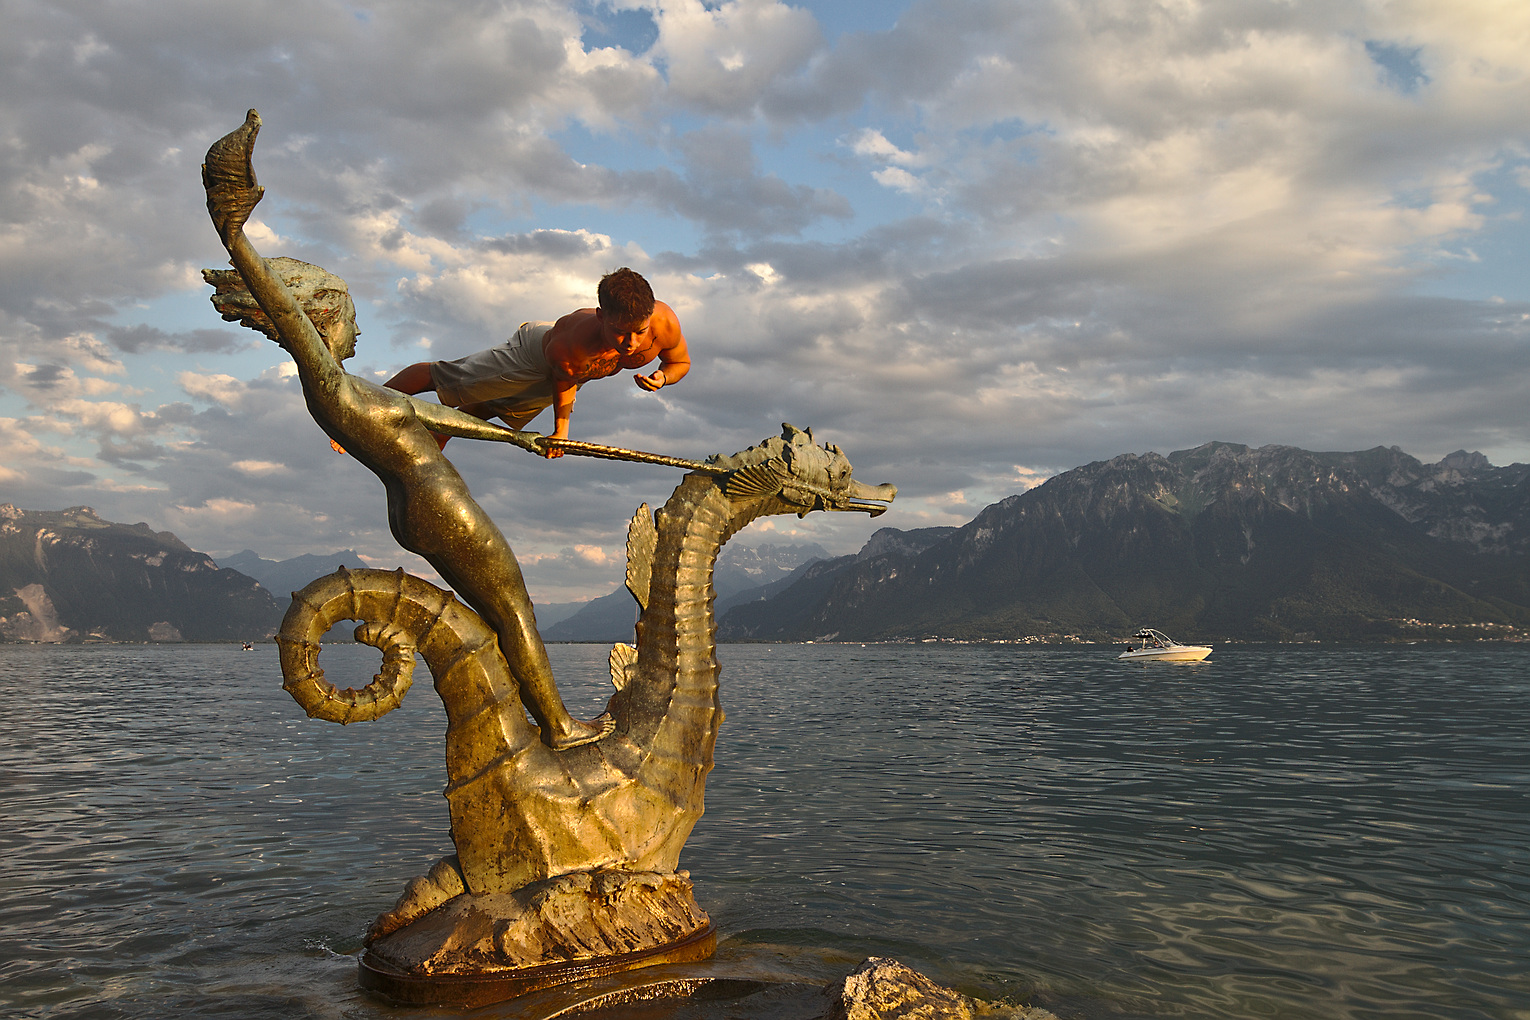 Equilibre @Vevey